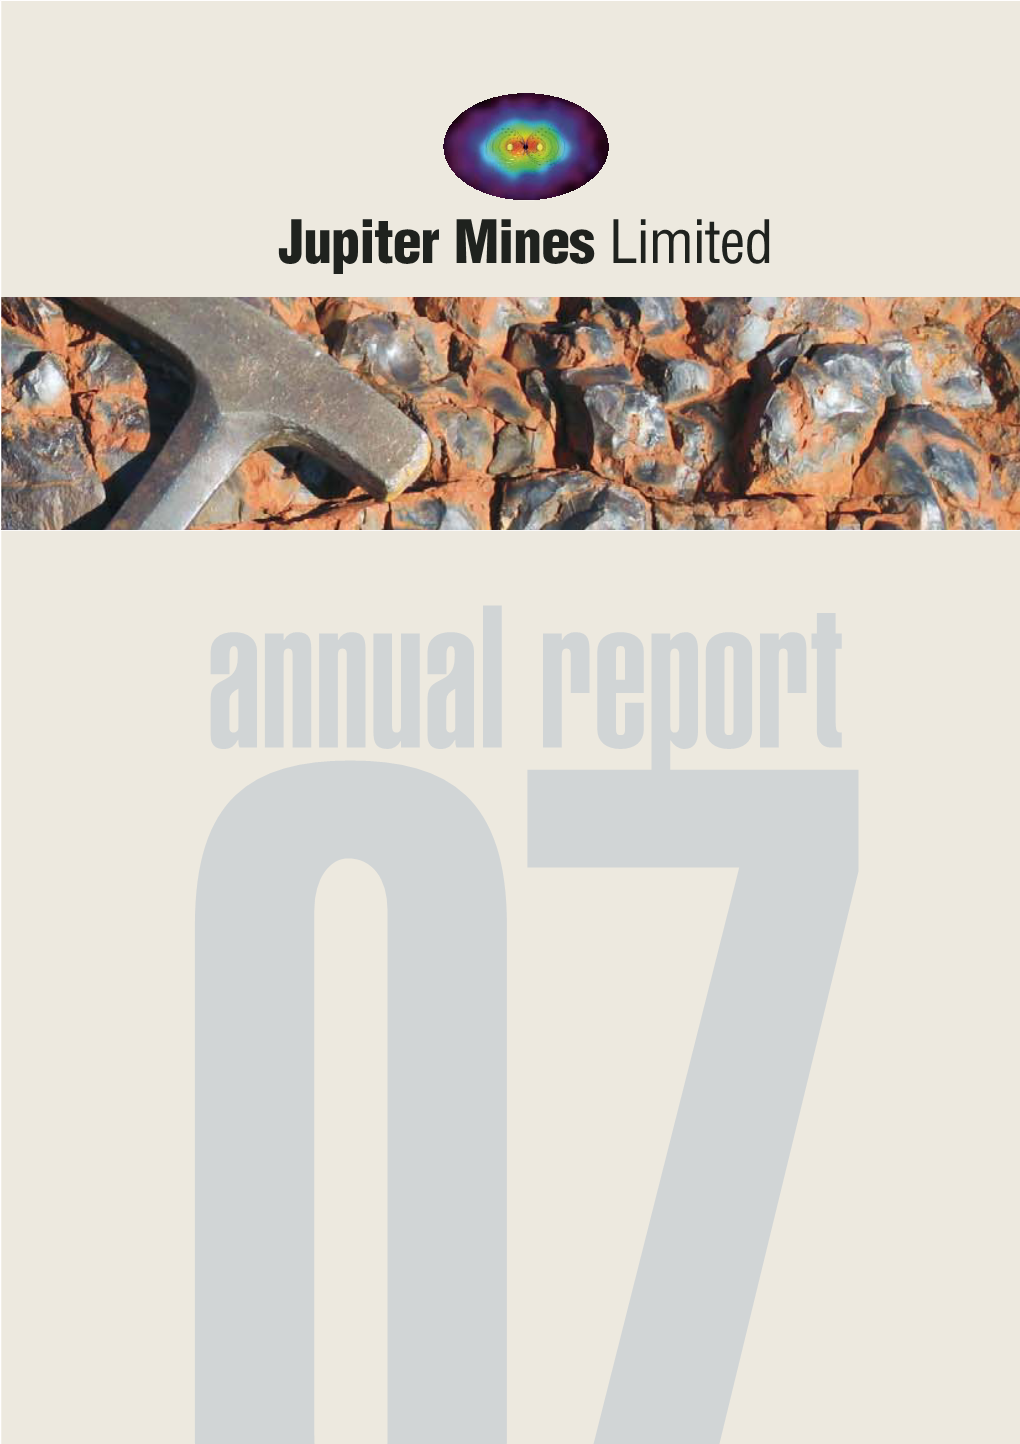 ANNUAL REPORT 2007 1 JUPITER MINES LIMITED and CONTROLLED ENTITIES Chairman’S Letter